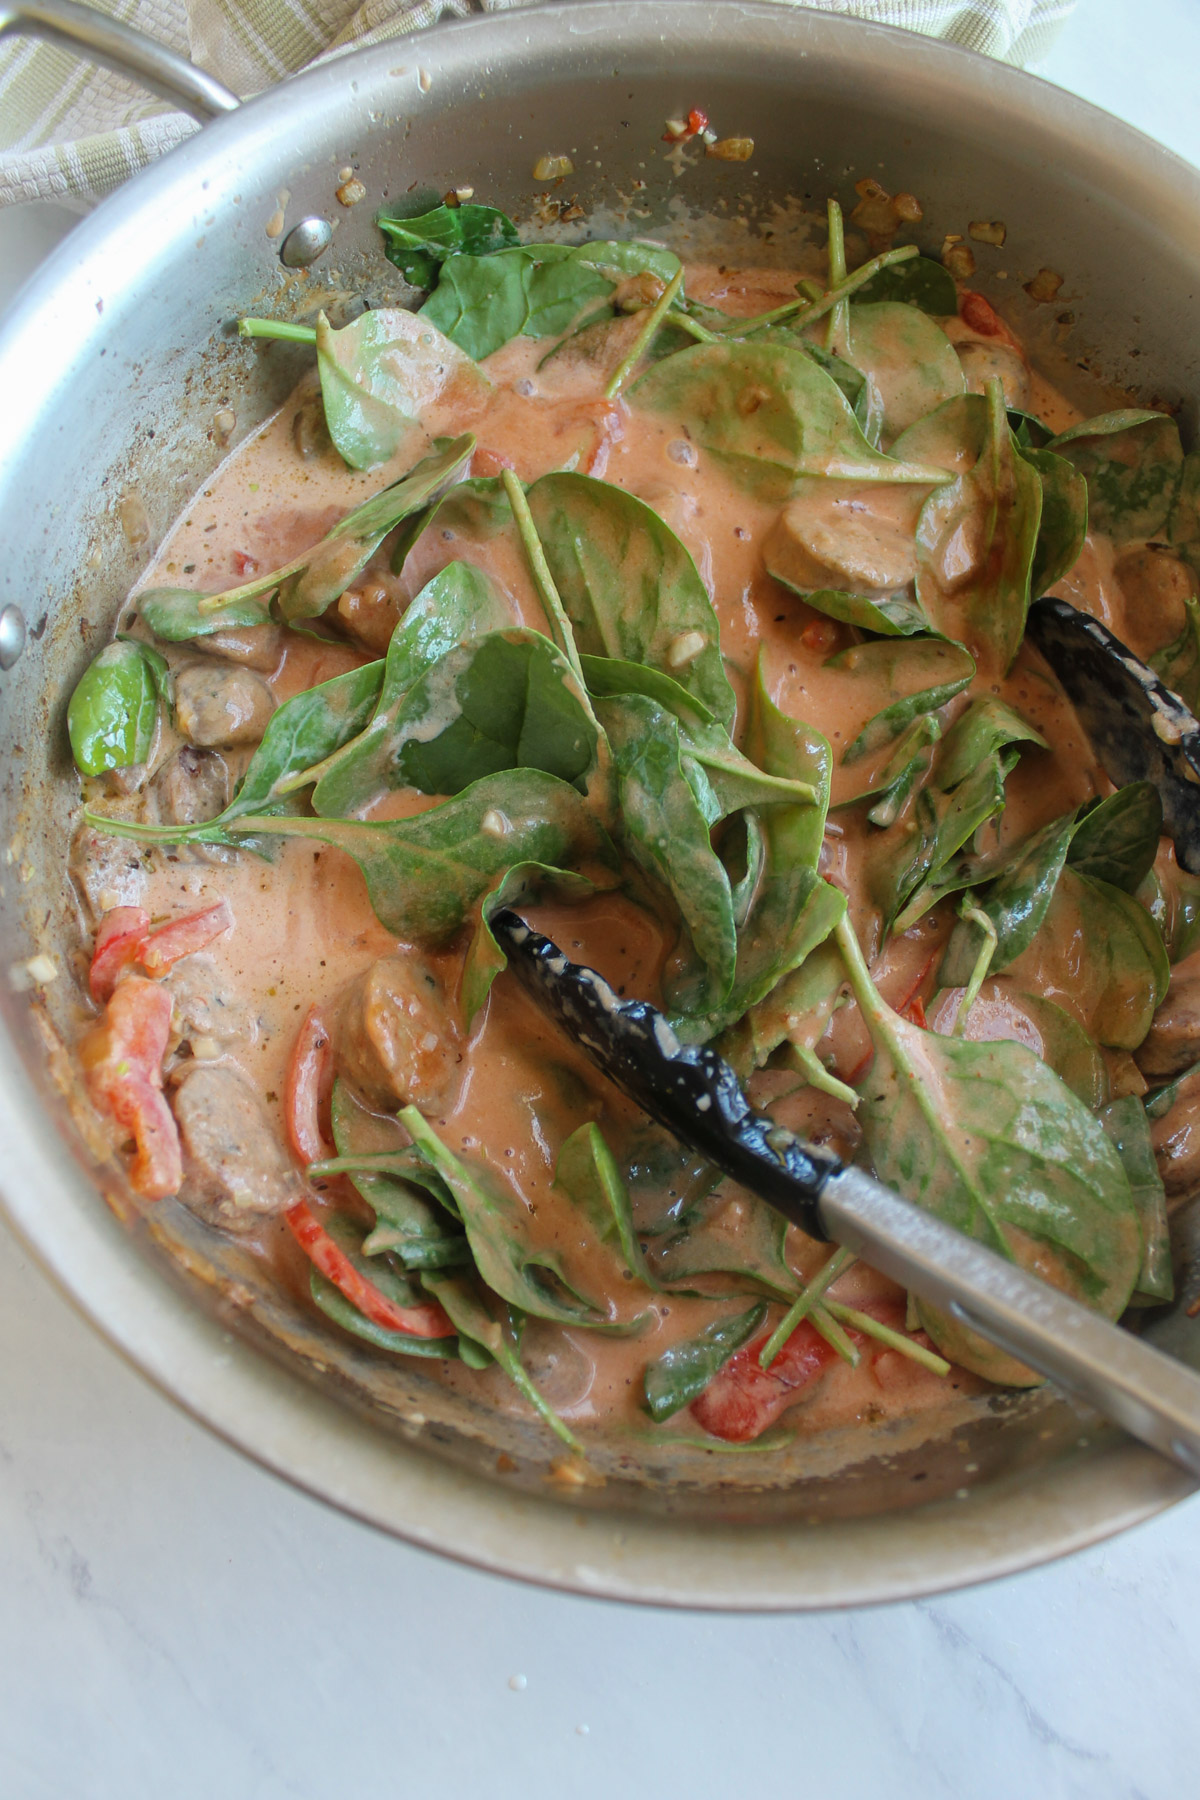 Mixing the creamy tomato pink sauce with the raw spinach and begin to simmer.